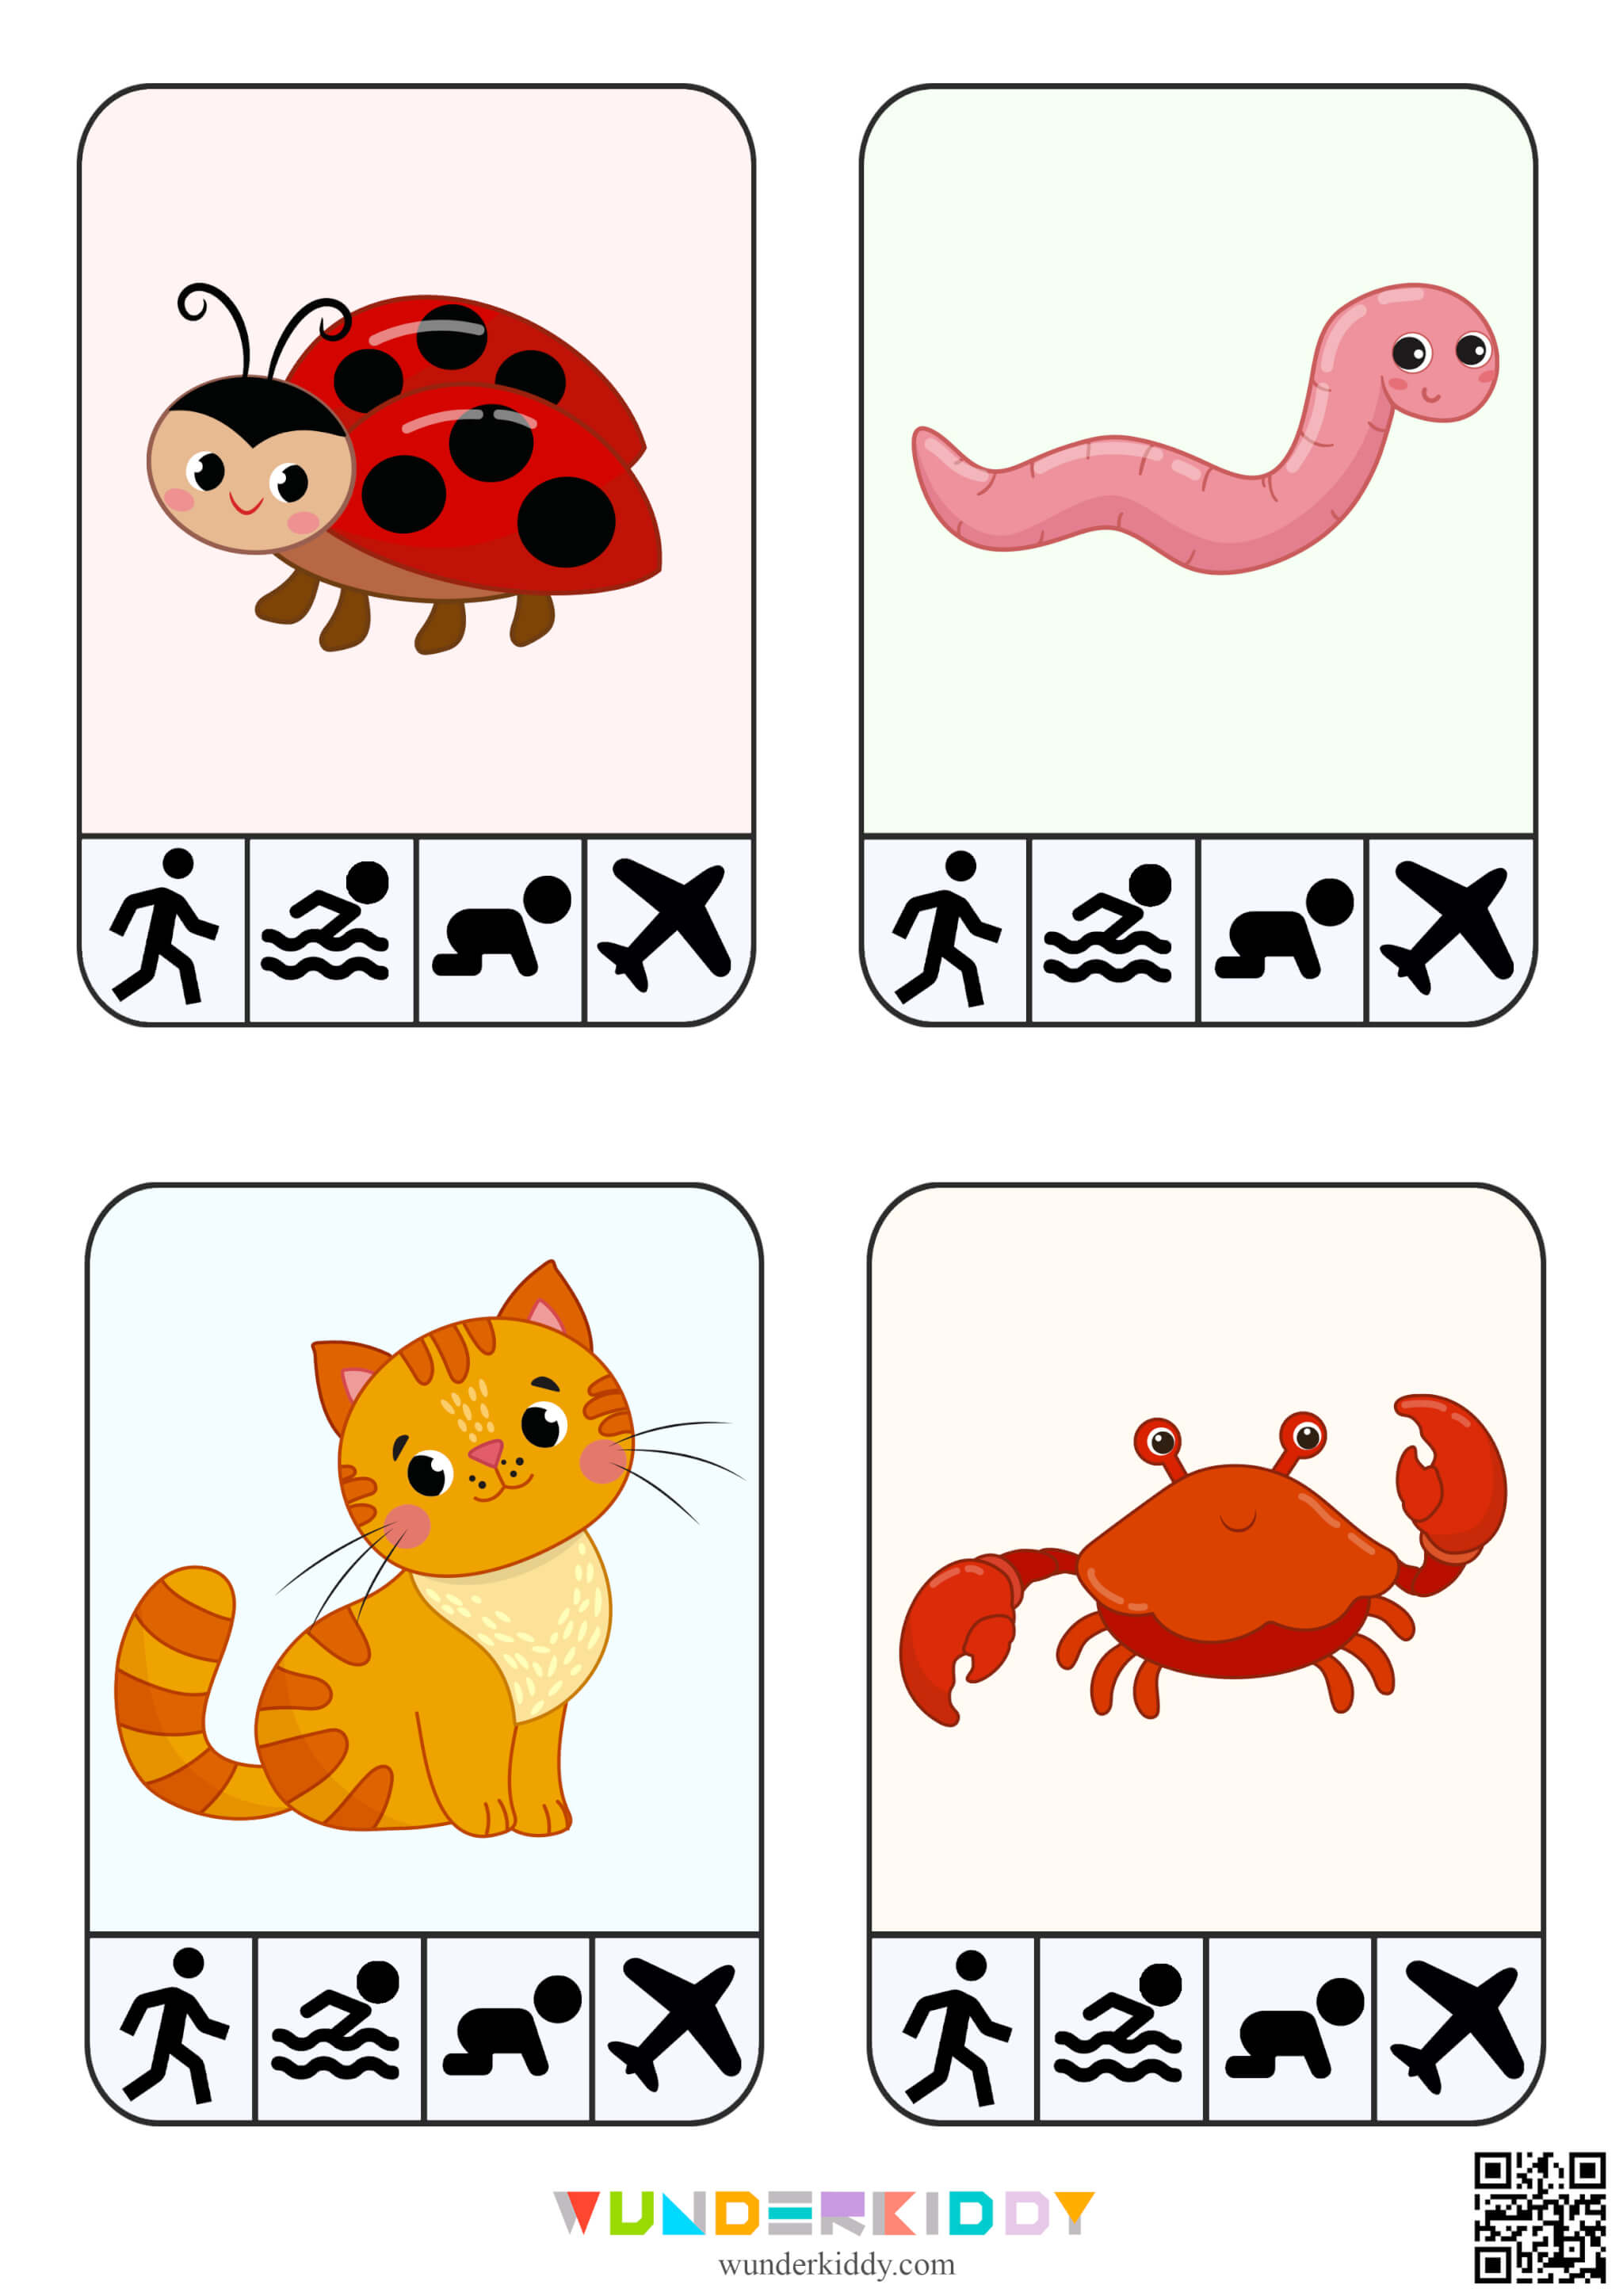 Animal Movements Activity for Kids - Image 9